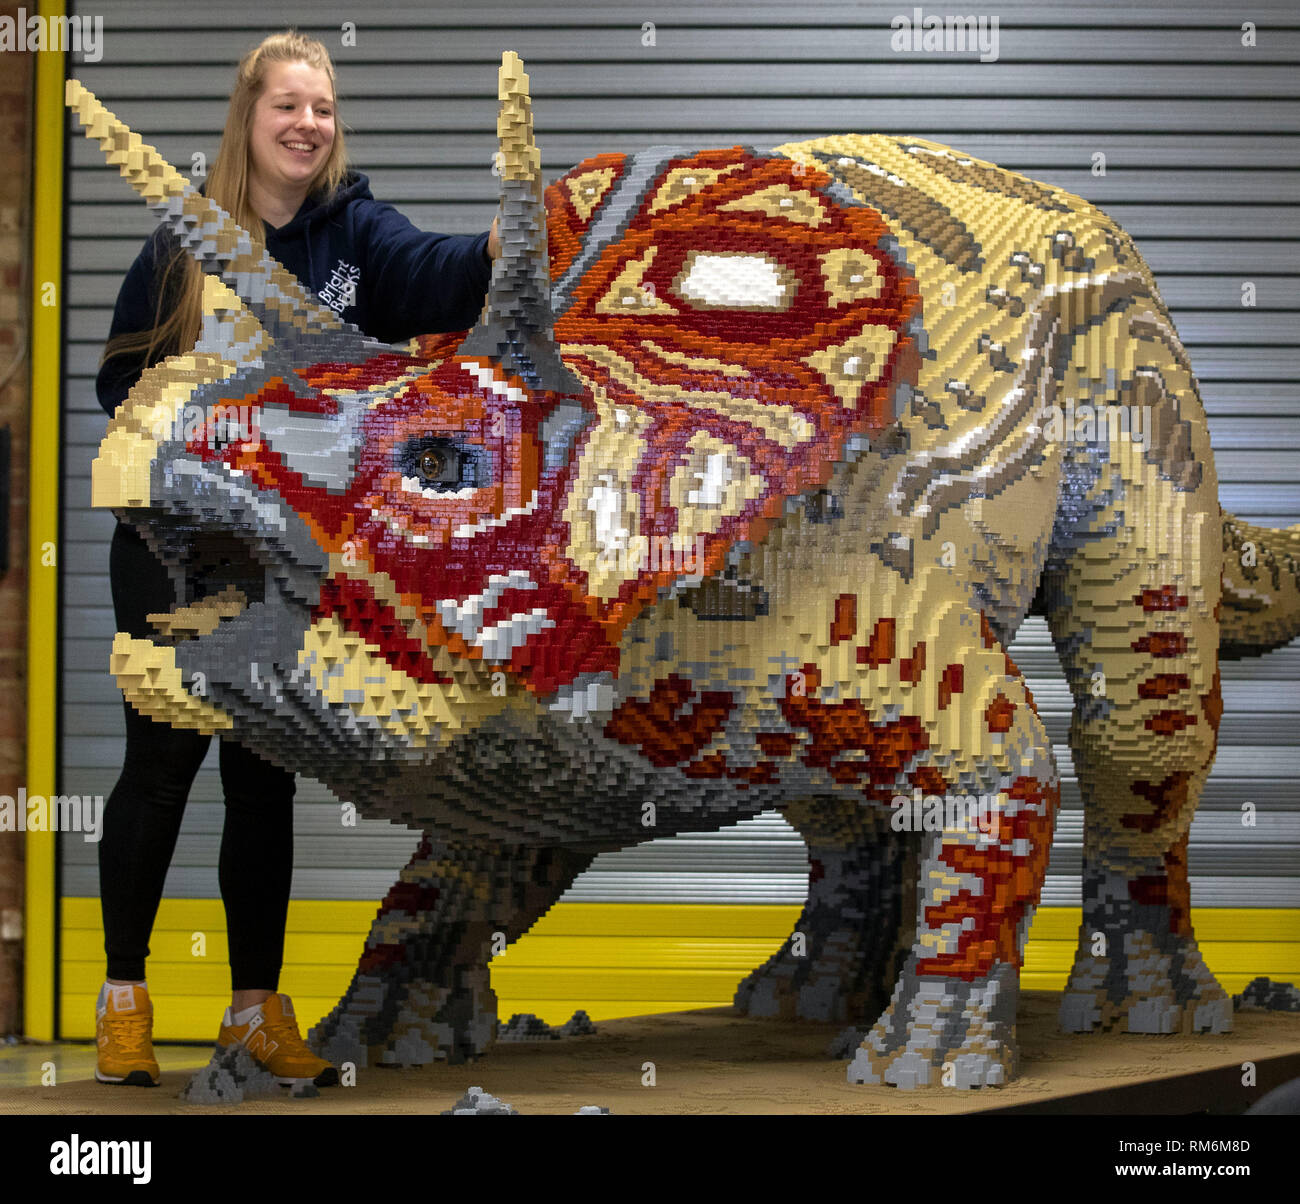 Bright Bricks member of staff Zoe Aris works on one of the brick dinosaurs made out of LEGO during a press preview of Marwell Zoo's new Lego Brickosaurs at Bright Bricks HQ in Bordon, Hampshire. Stock Photo